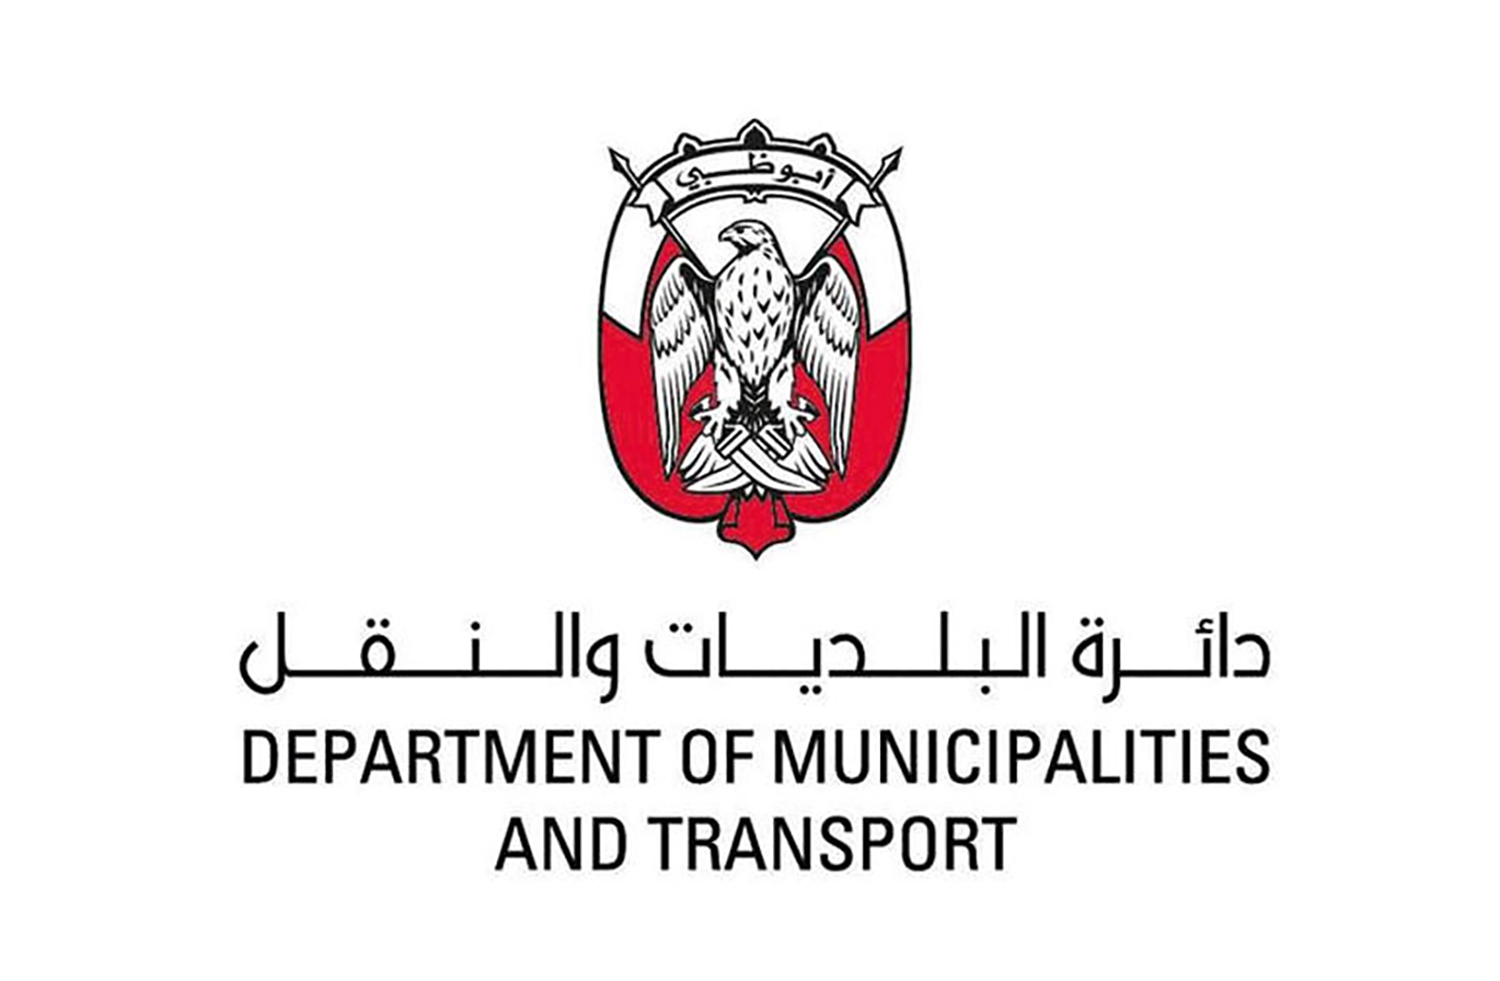 department of municipalities and transport continuing to mitigate impact of weather conditions across emirate